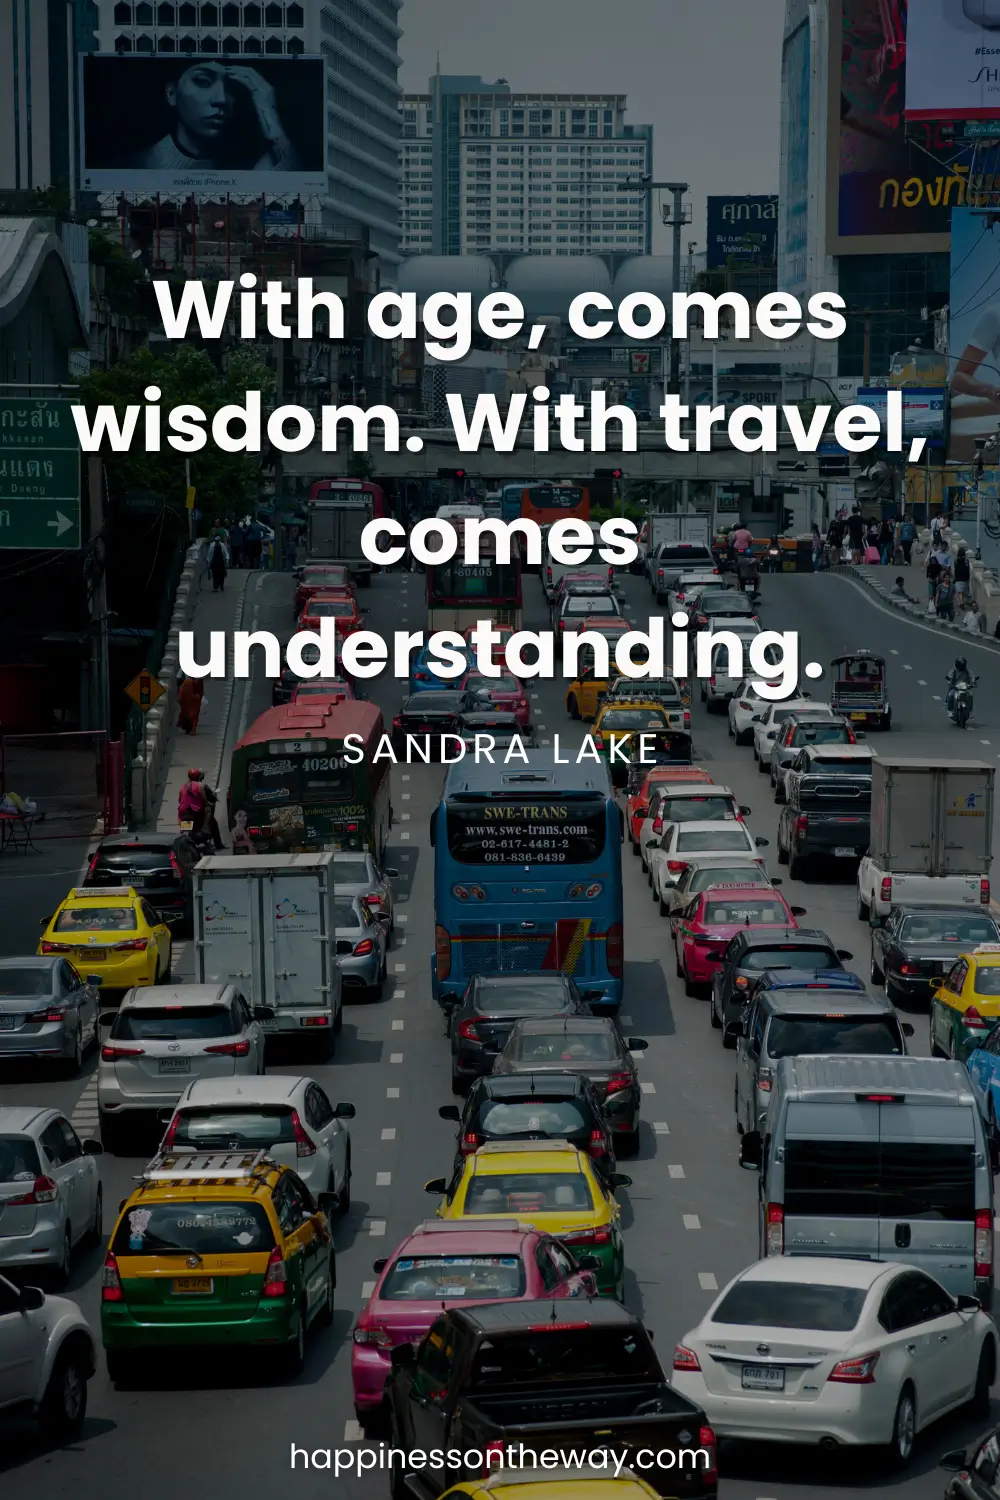 Busy city traffic with a variety of colorful cars on a multi-lane road, under a billboard and urban buildings, overlayed with the insightful slow travel quote 'With age, comes wisdom. With travel, comes understanding.' by Sandra Lake